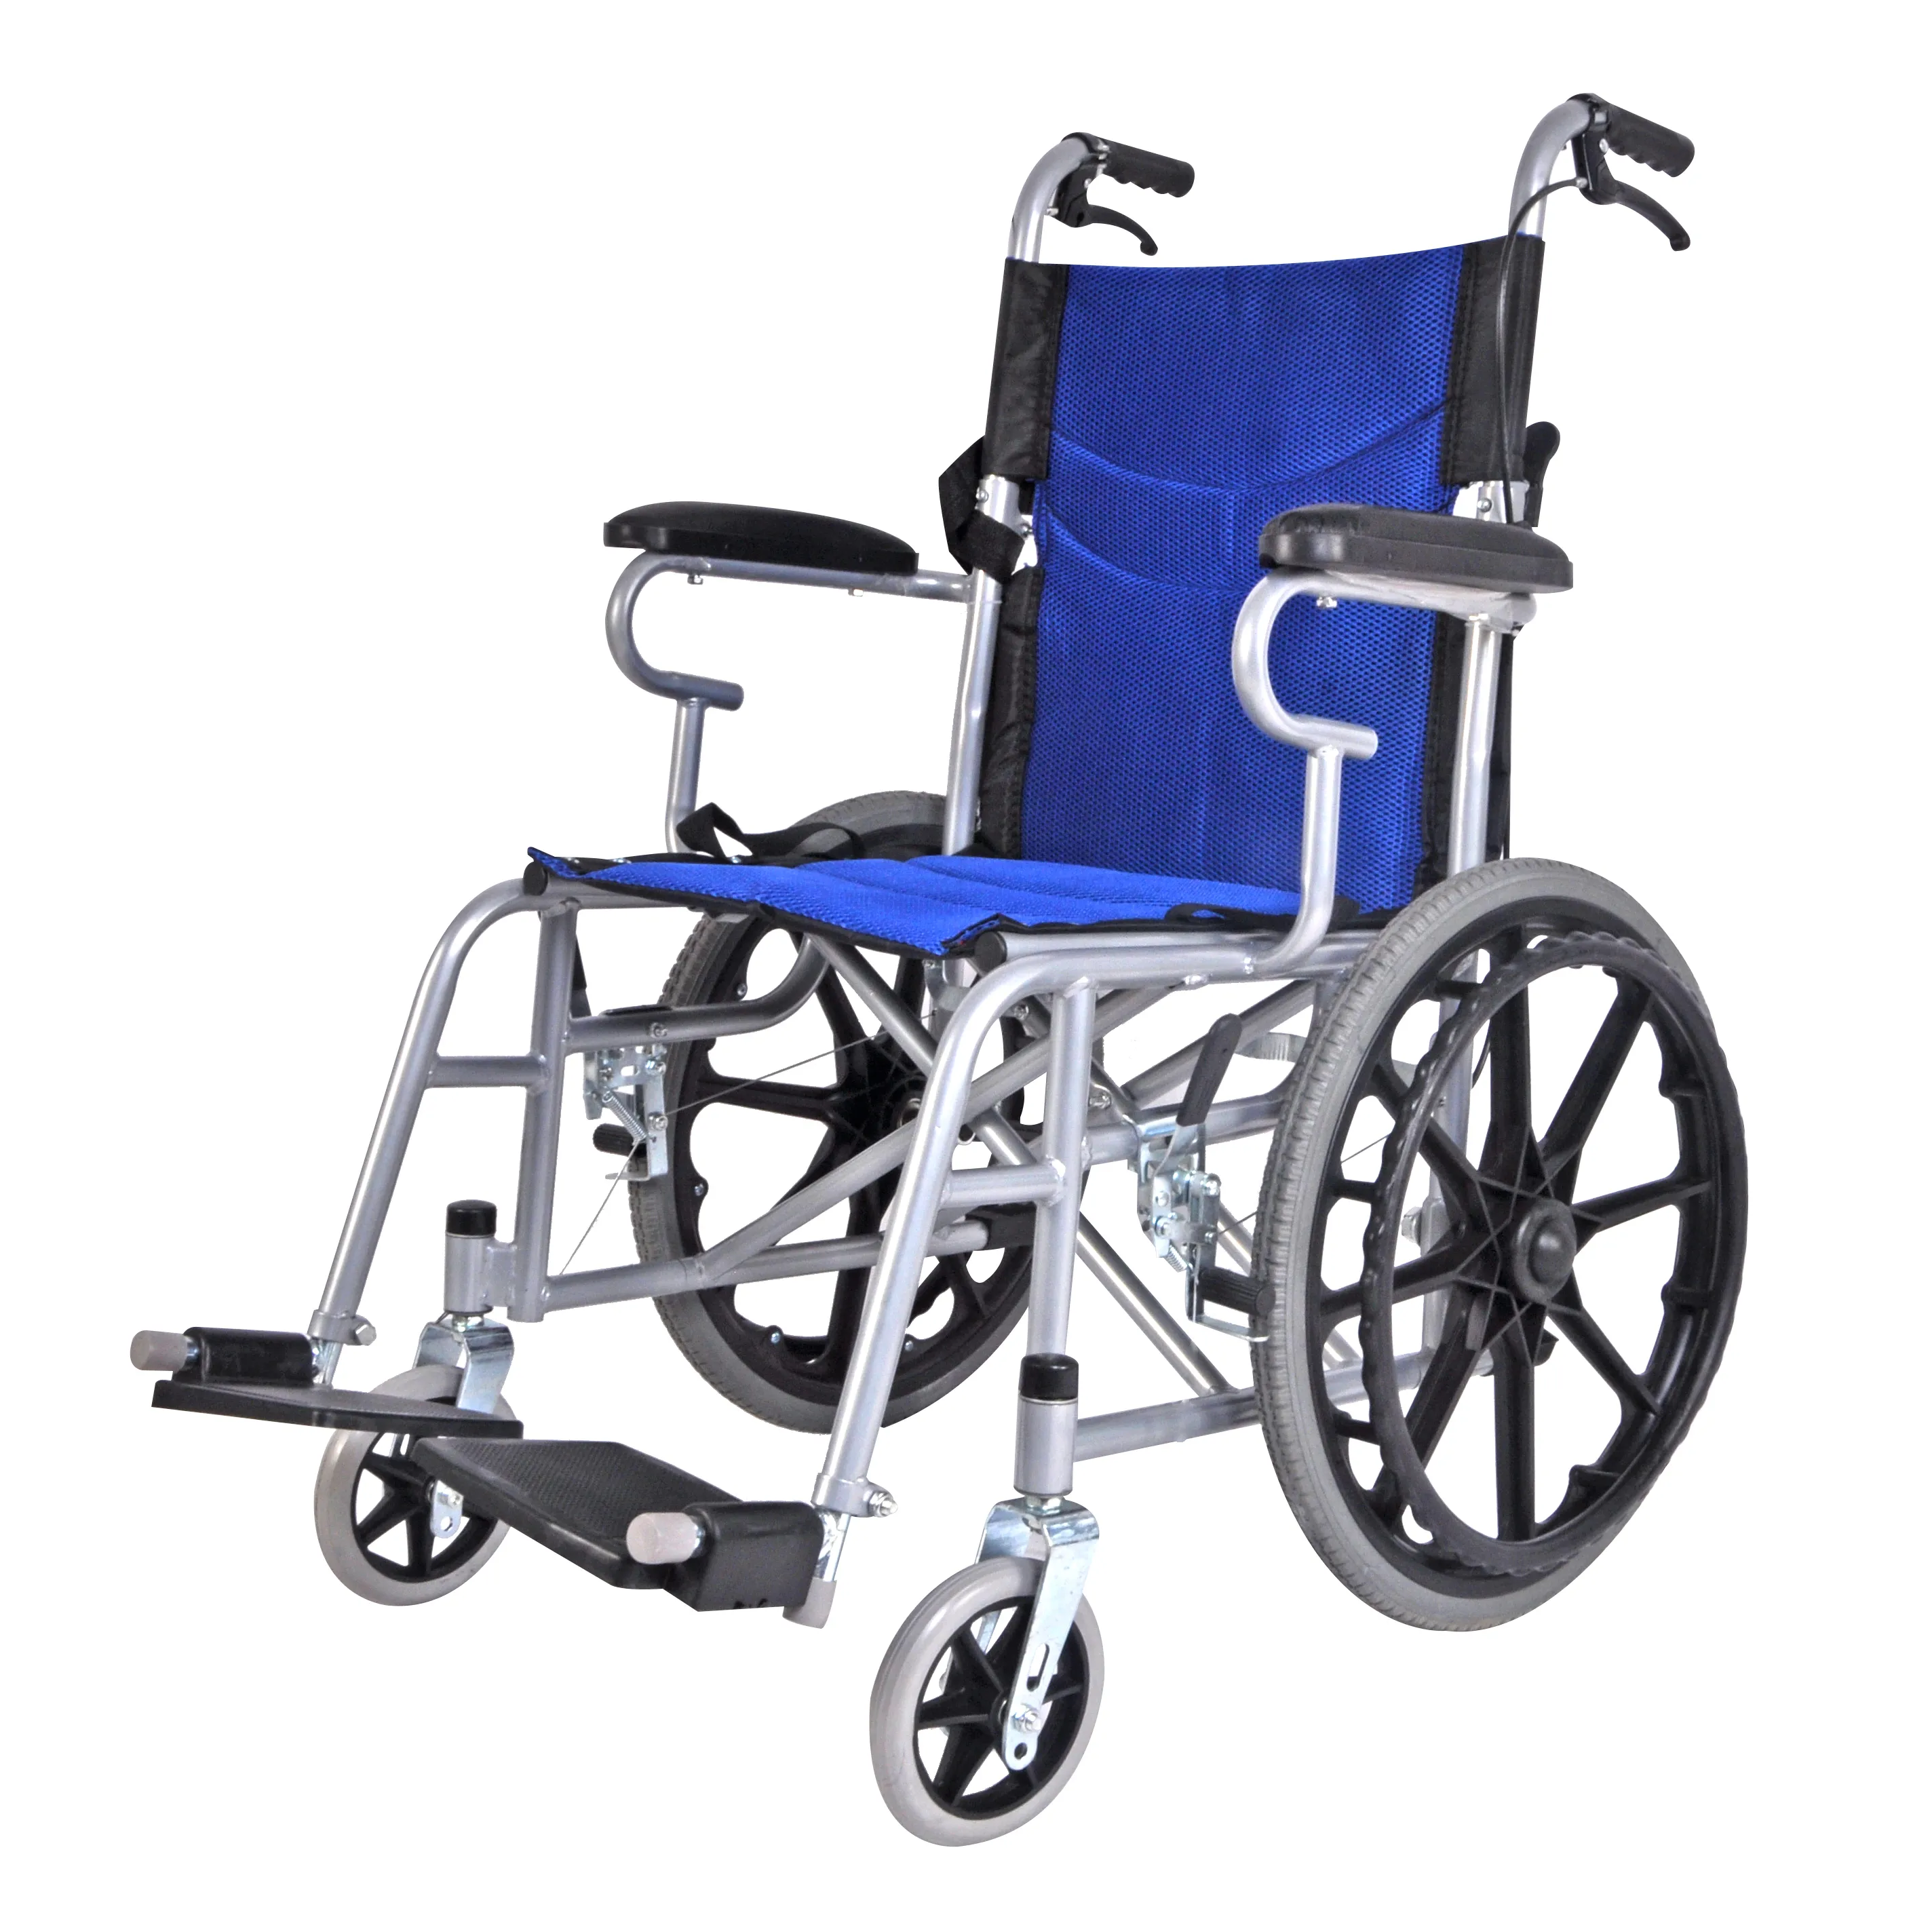 MIC Factory Direct 20 inch Self-pushing manual wheelchair lightweight folding portable cheap wheelchair with small size